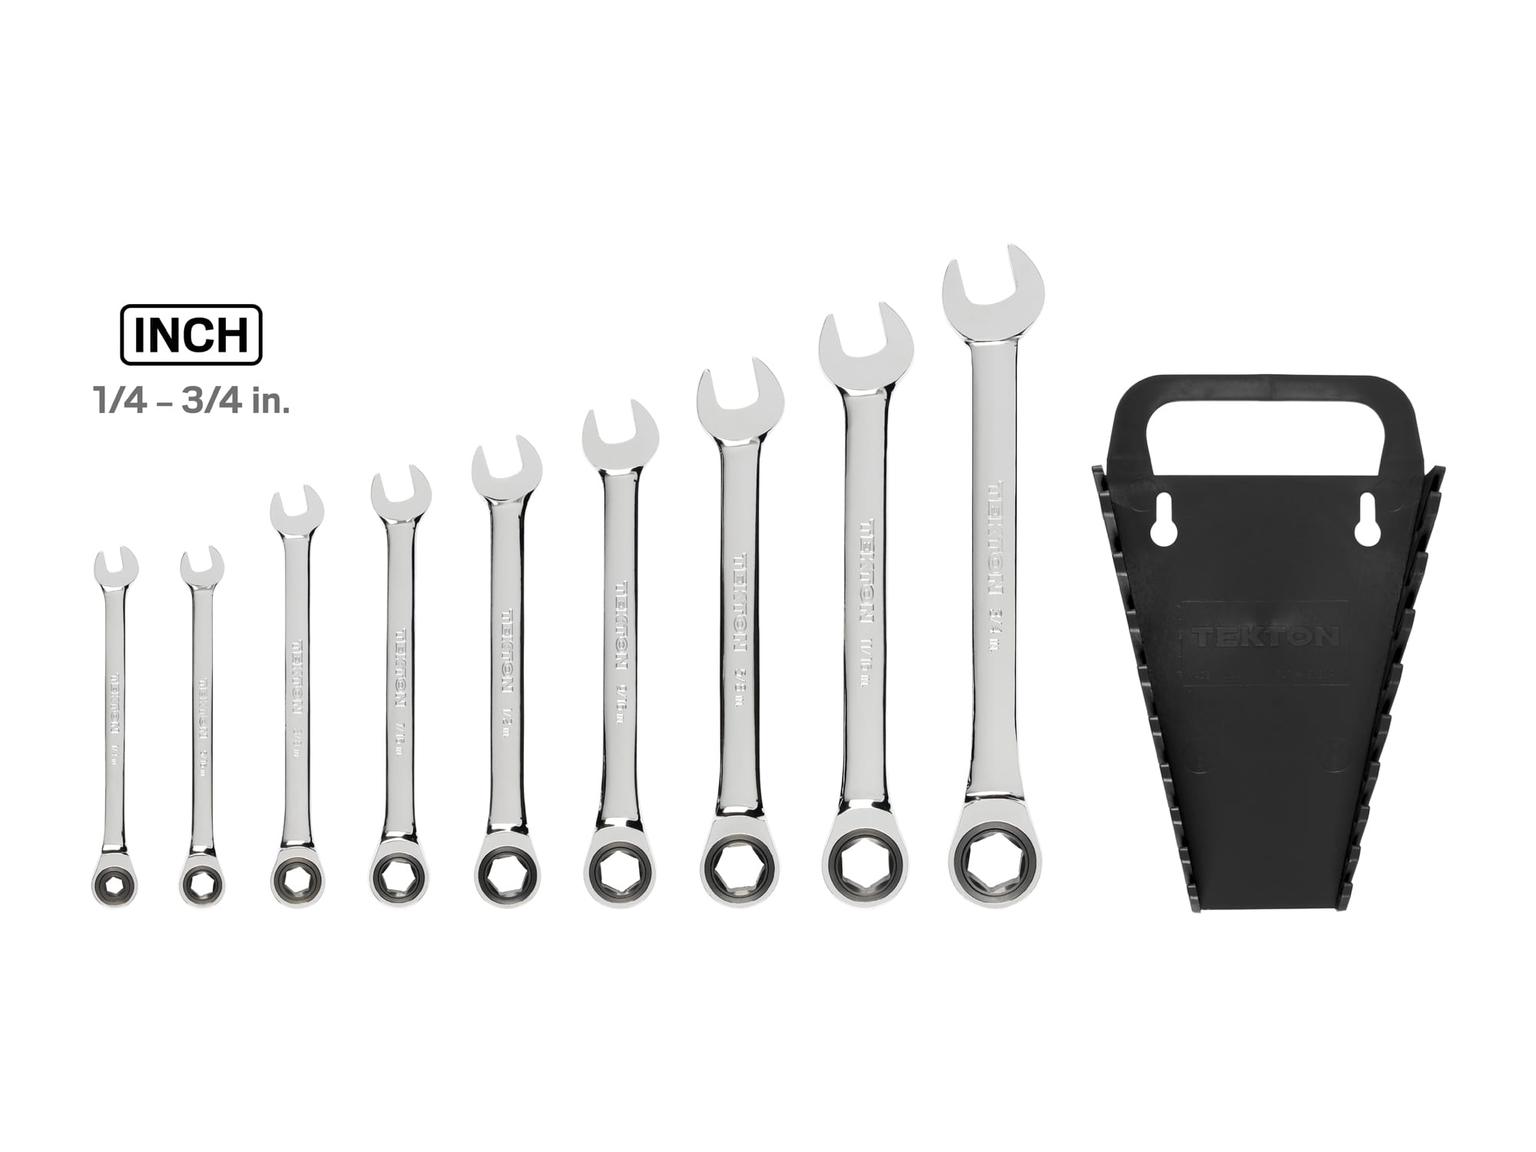 TEKTON WRN53067-T Ratcheting Combination Wrench Set with Holder, 9-Piece (1/4-3/4 in.)